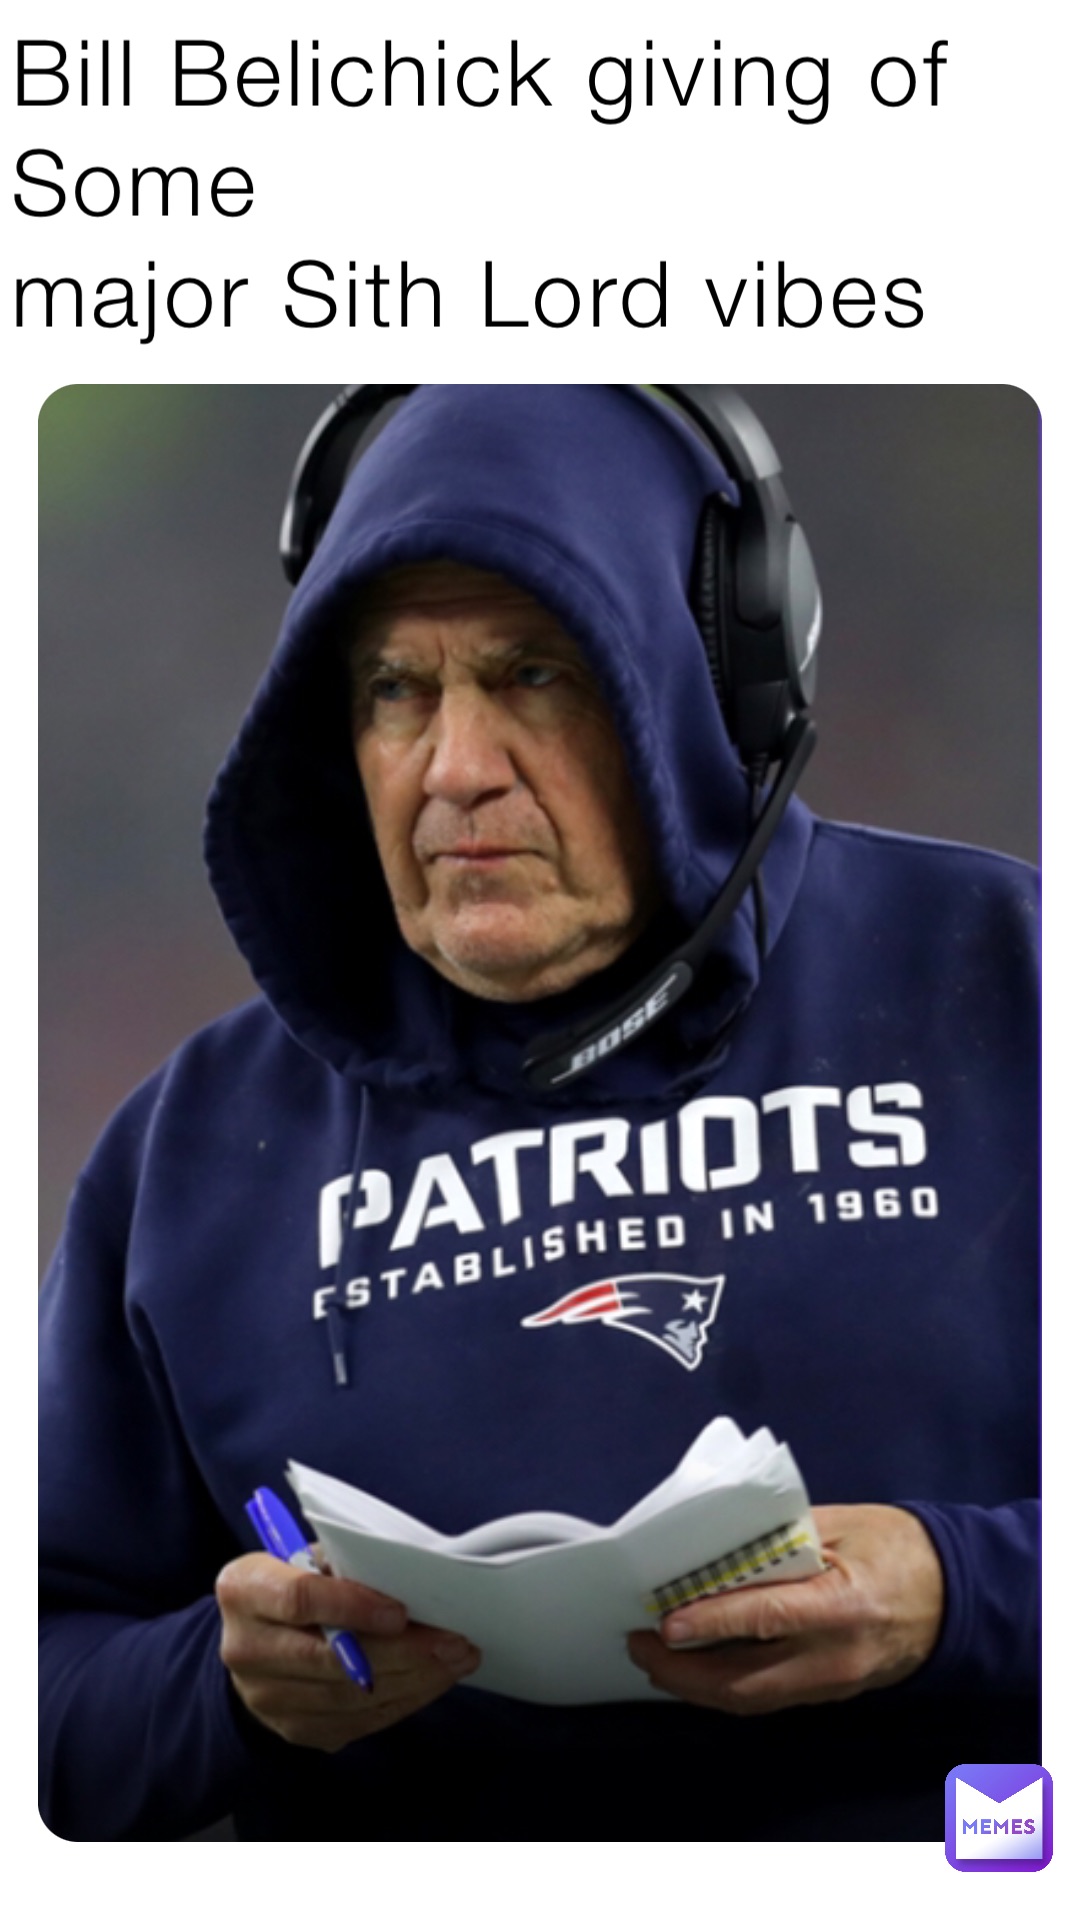 Bill Belichick giving of Some 
major Sith Lord vibes